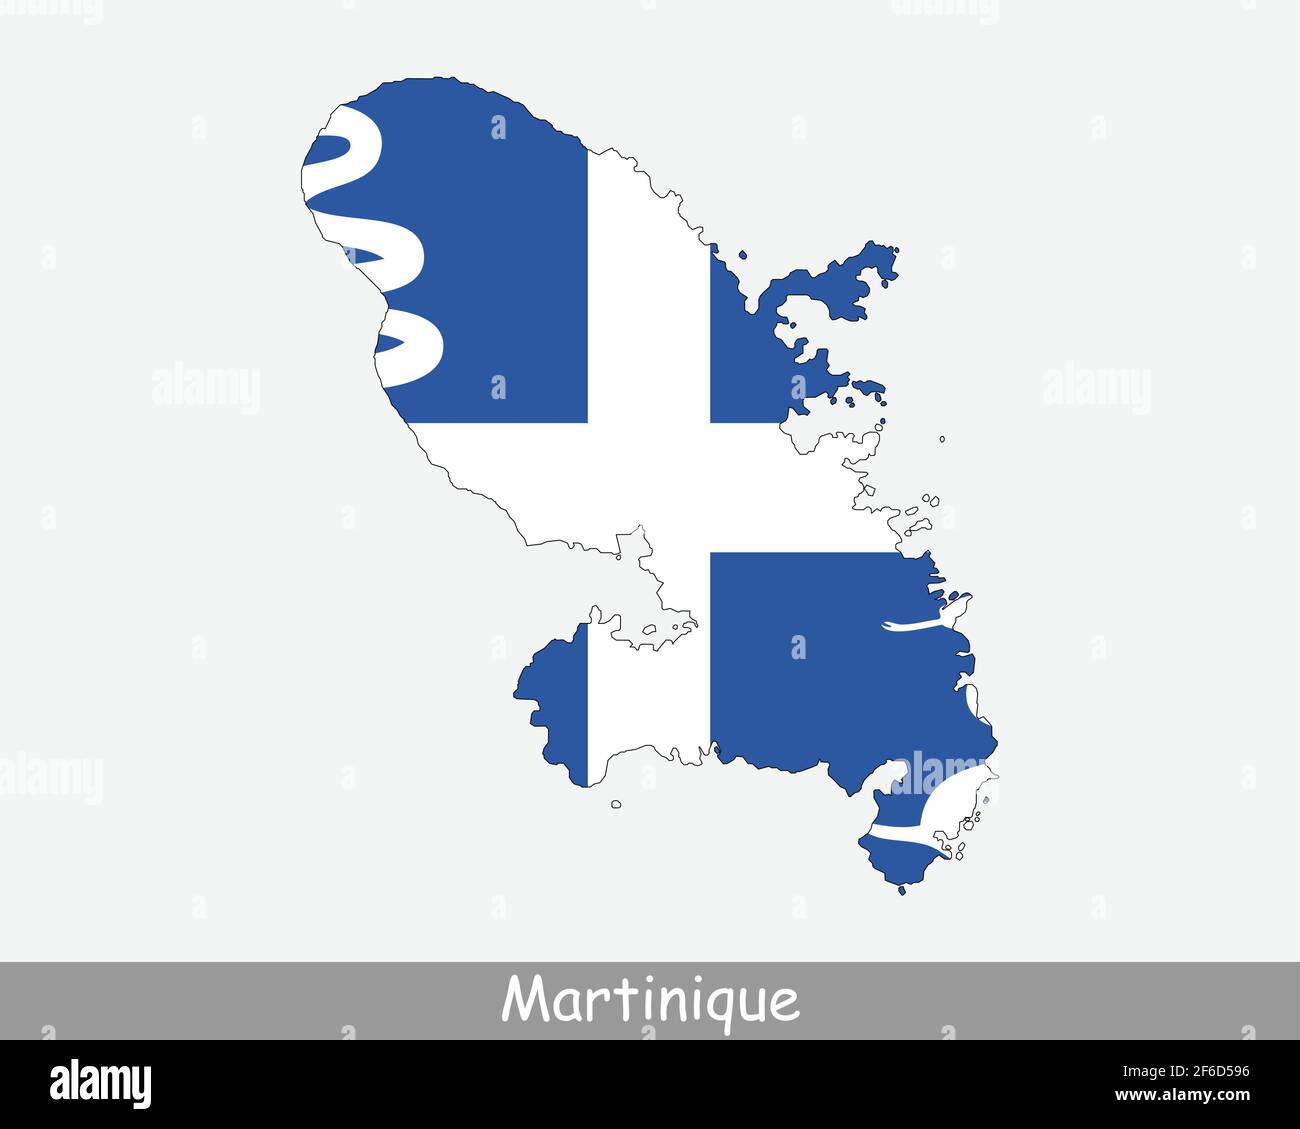 https://c8.alamy.com/comp/2F6D596/martinique-map-flag-map-of-martinique-with-flag-isolated-on-white-background-overseas-department-region-and-single-territorial-collectivity-of-fran-2F6D596.jpg